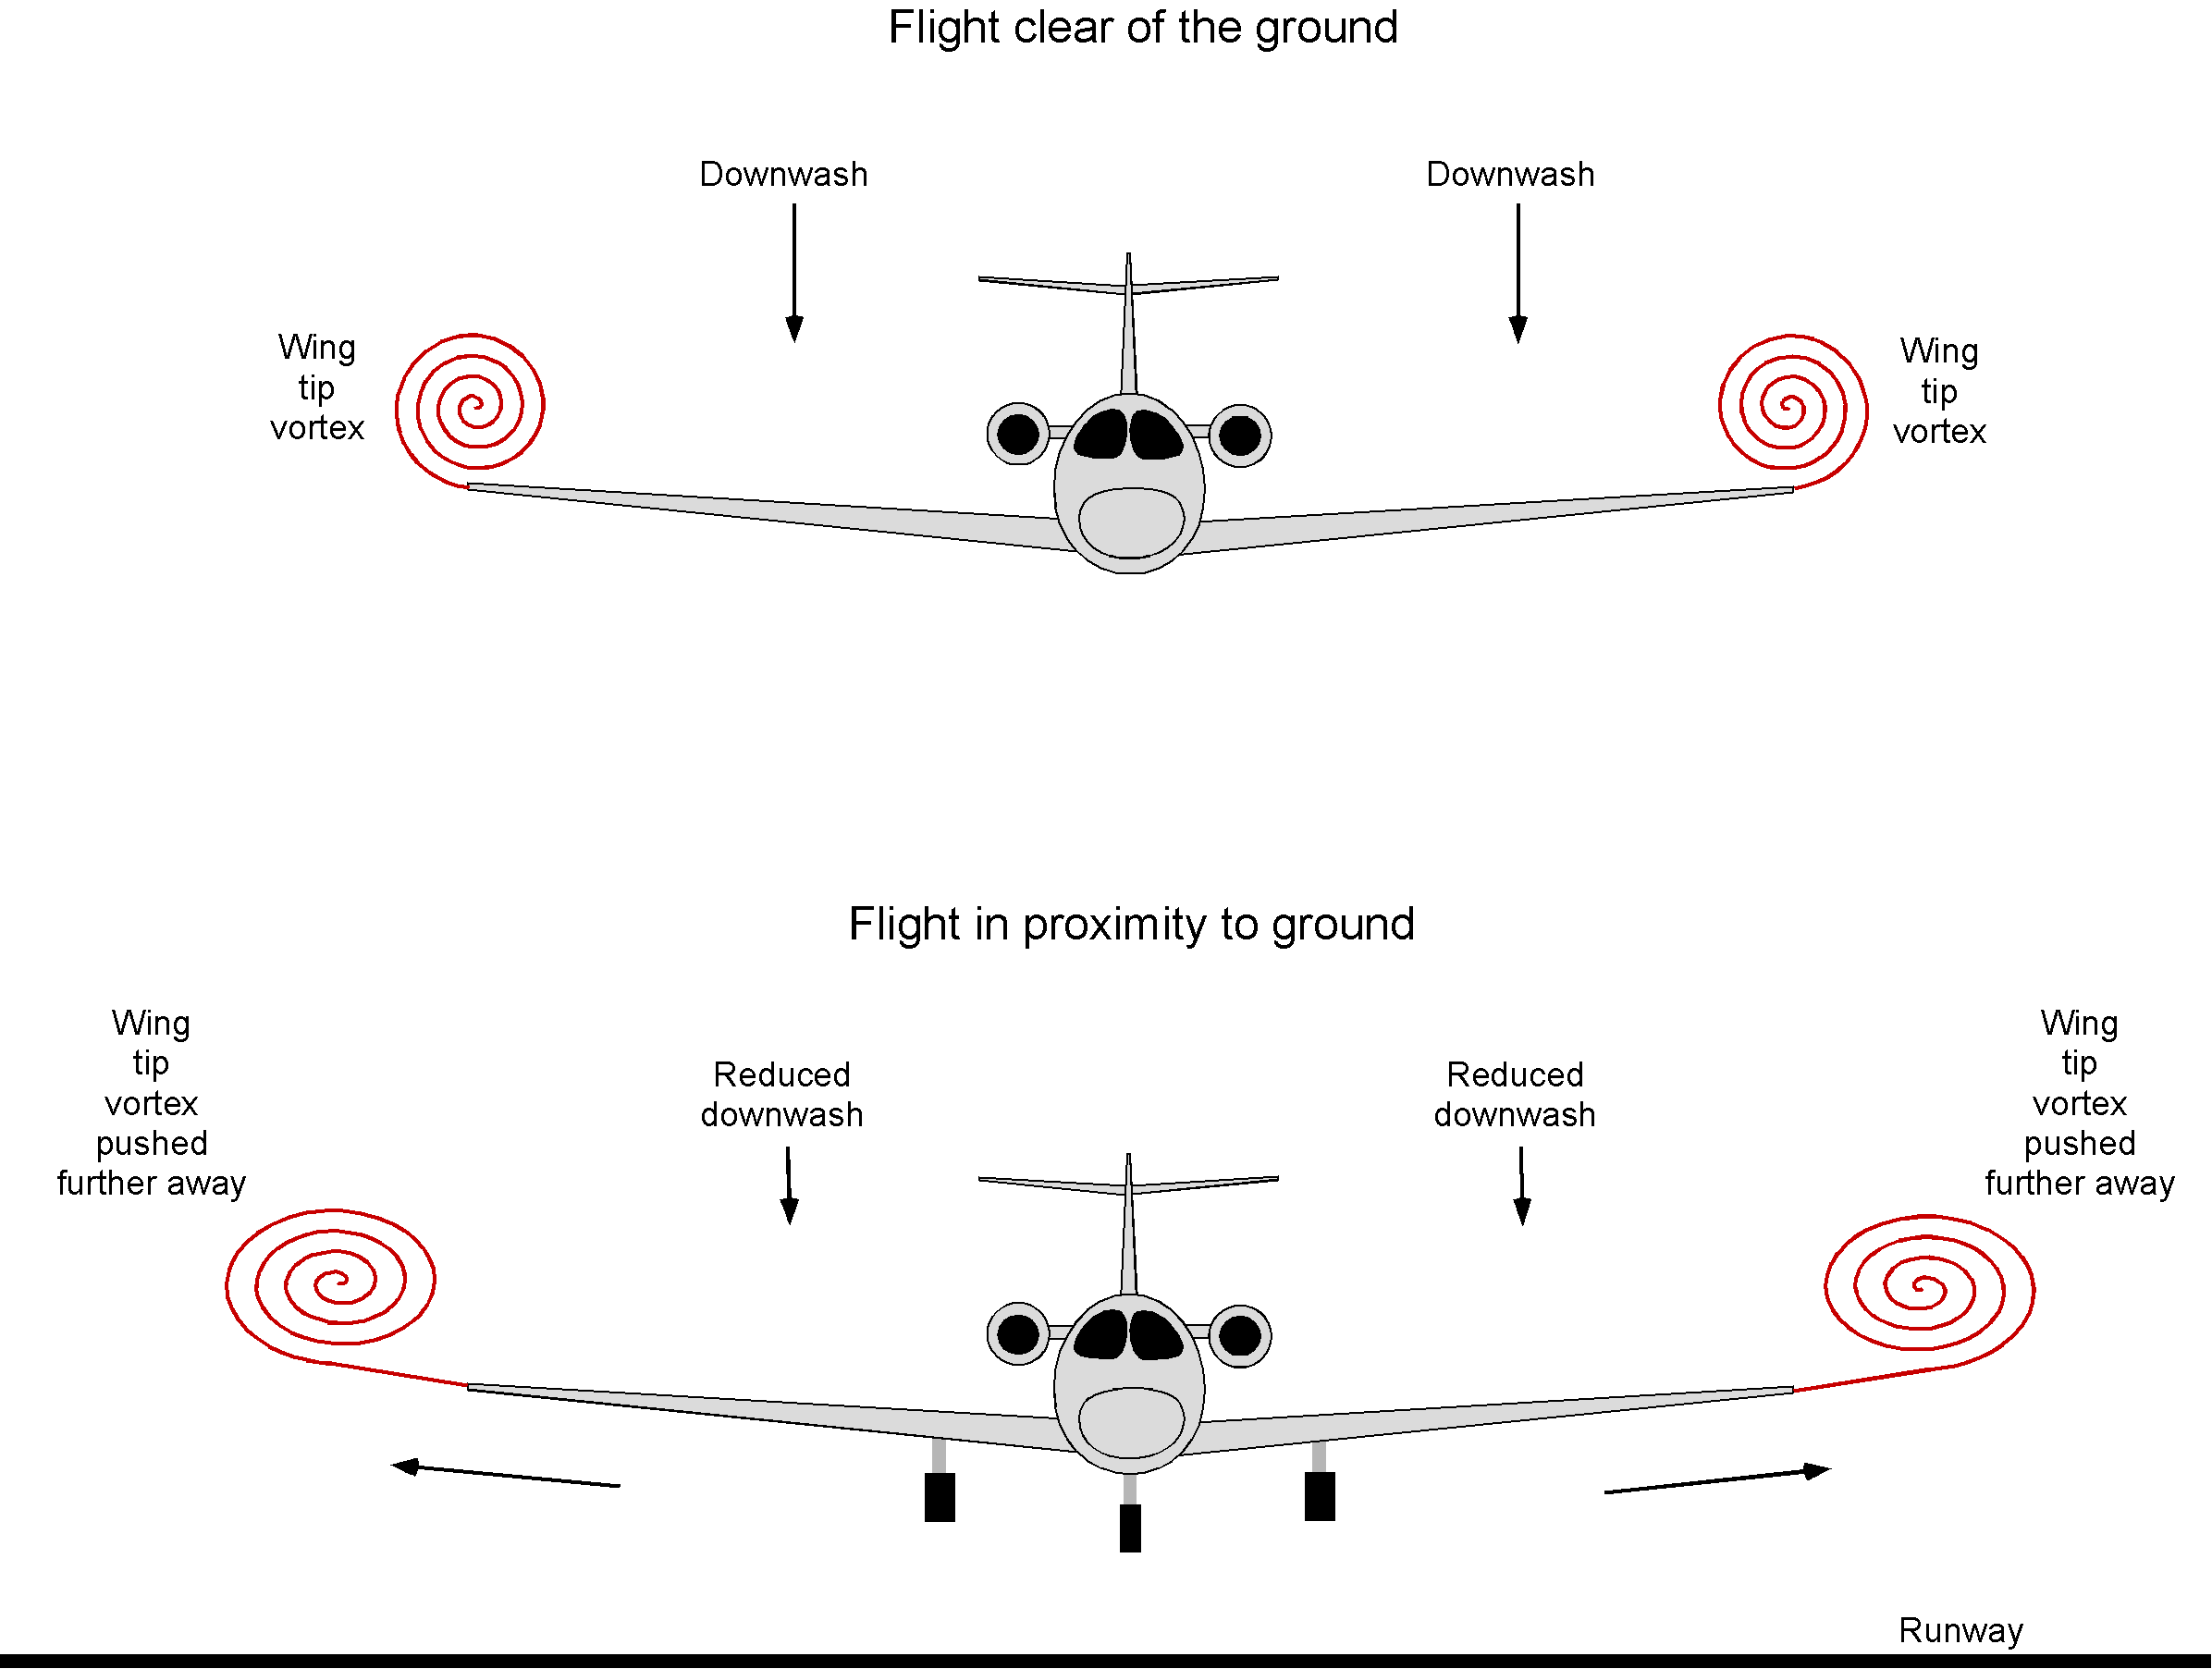 What is Ground Effect?, Impact on Aircraft & Helicopters, Understanding  Downwash & Induced Drag